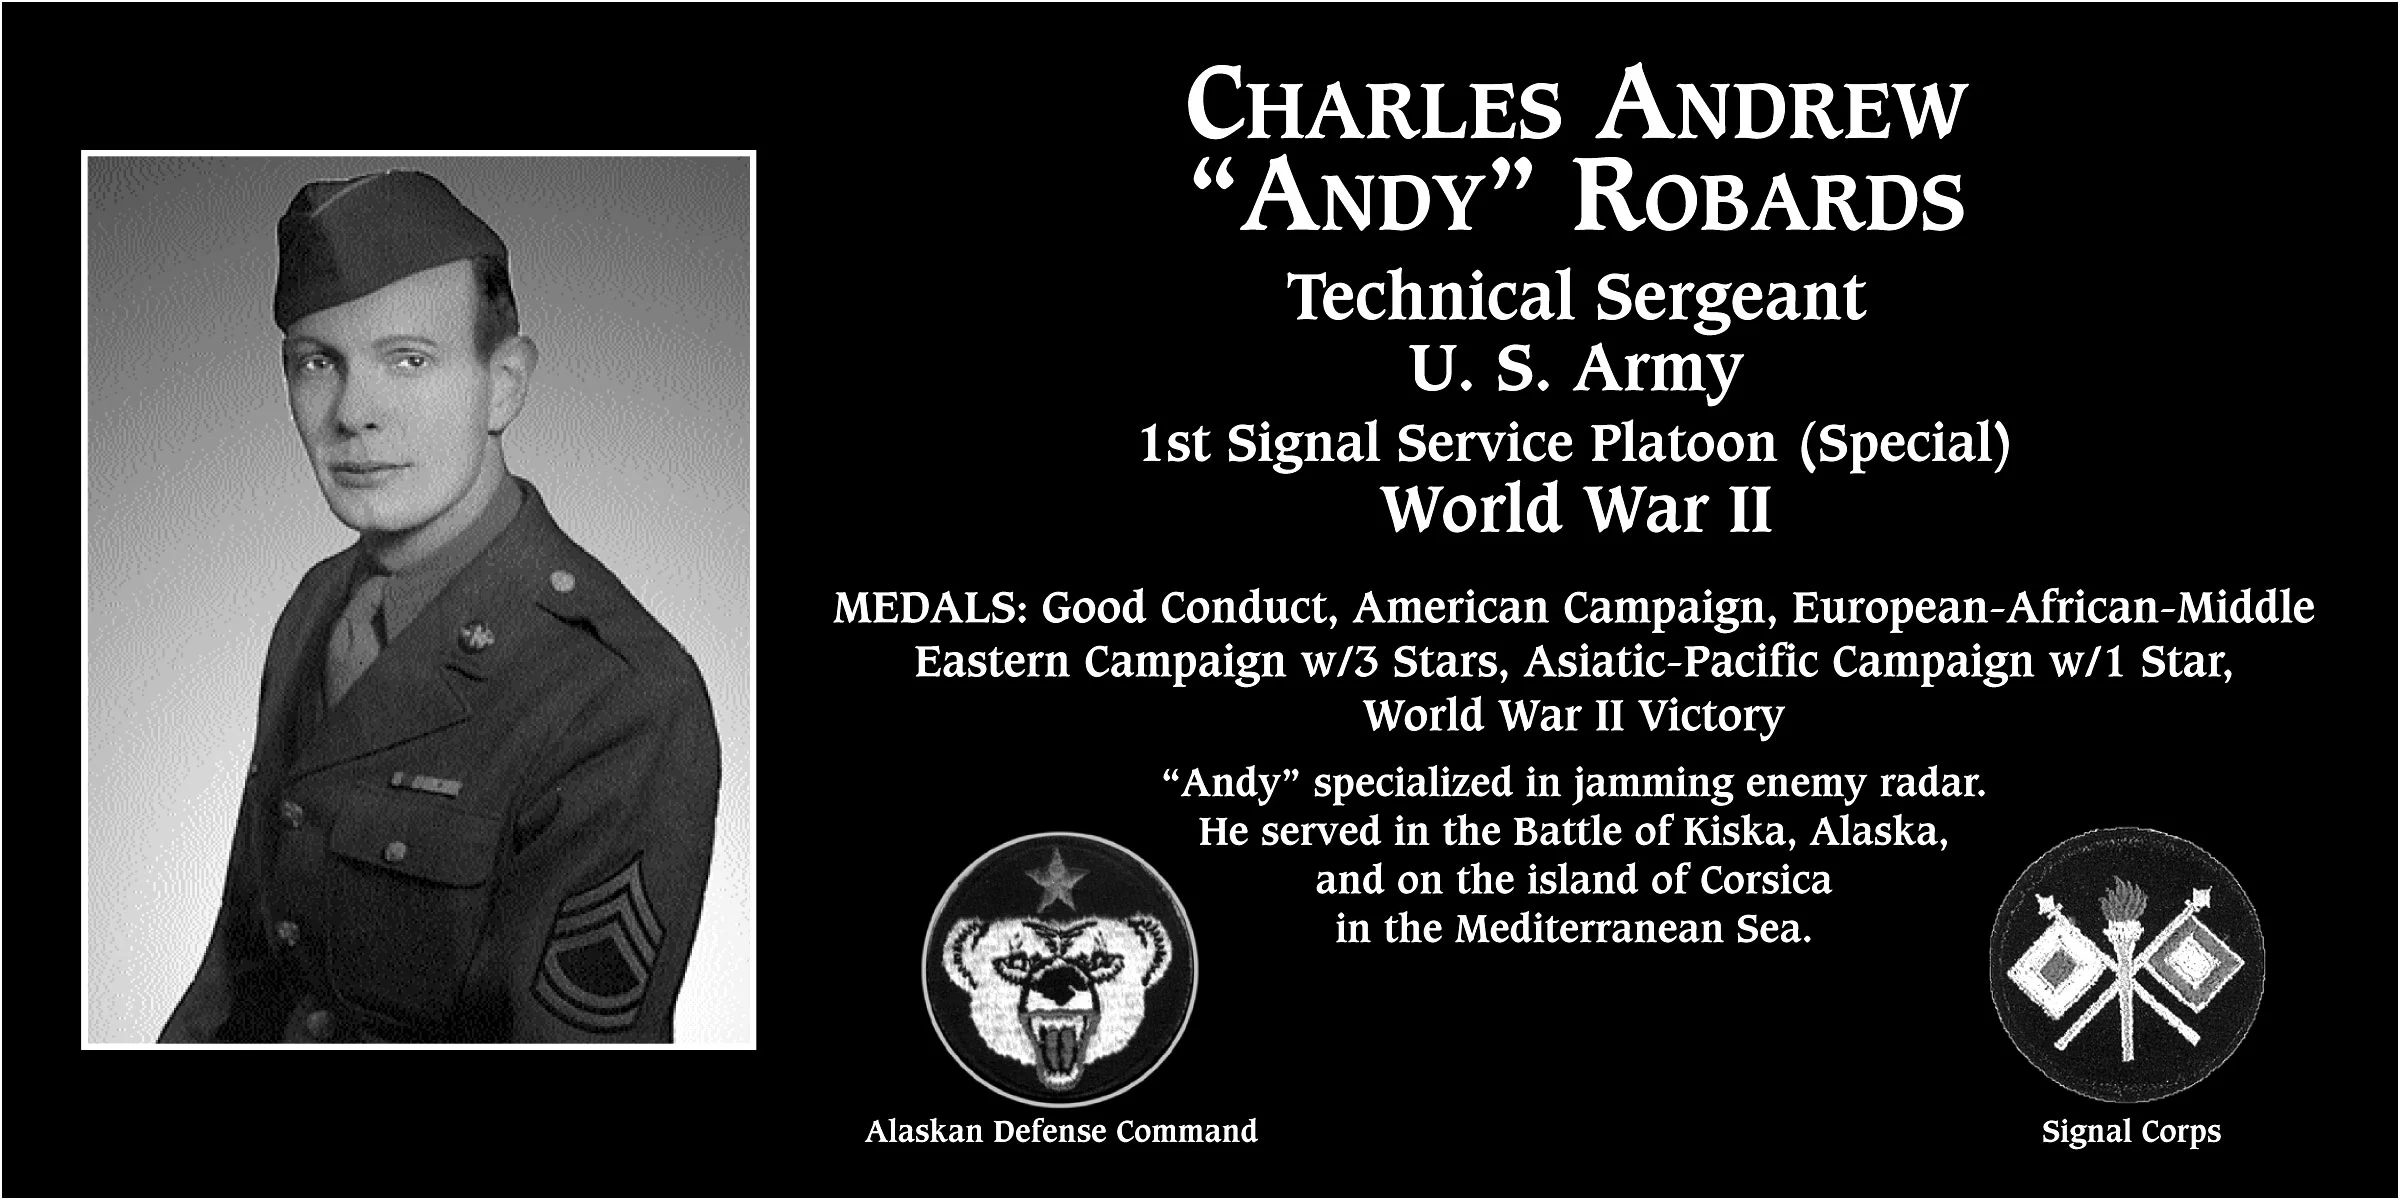 Charles Andrew “Andy” Robards